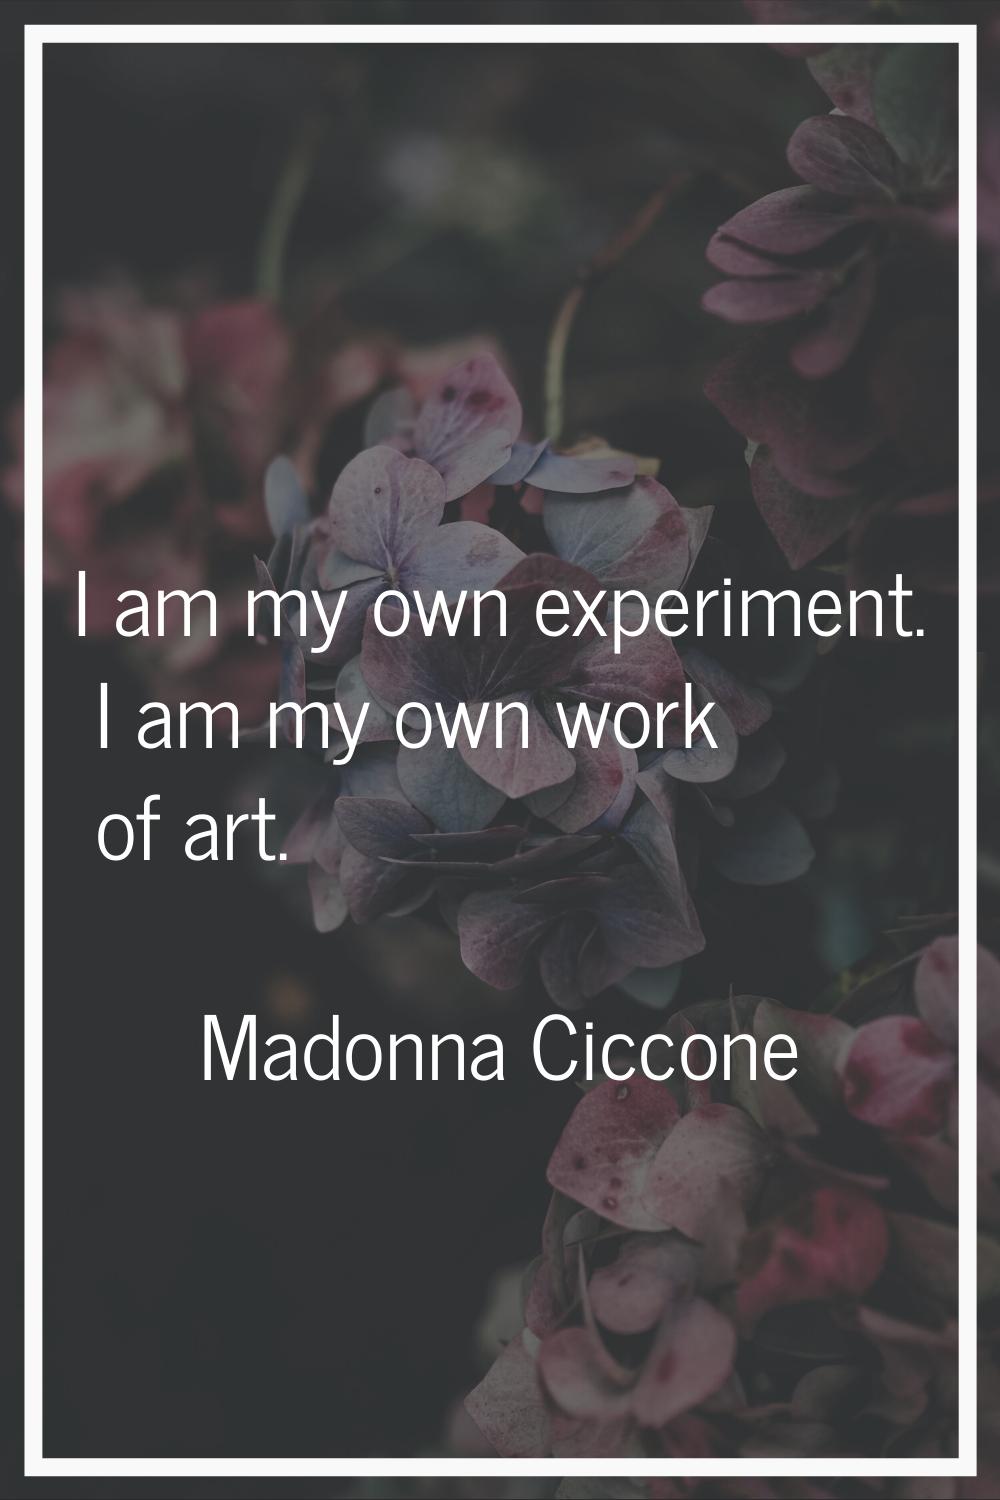 I am my own experiment. I am my own work of art.